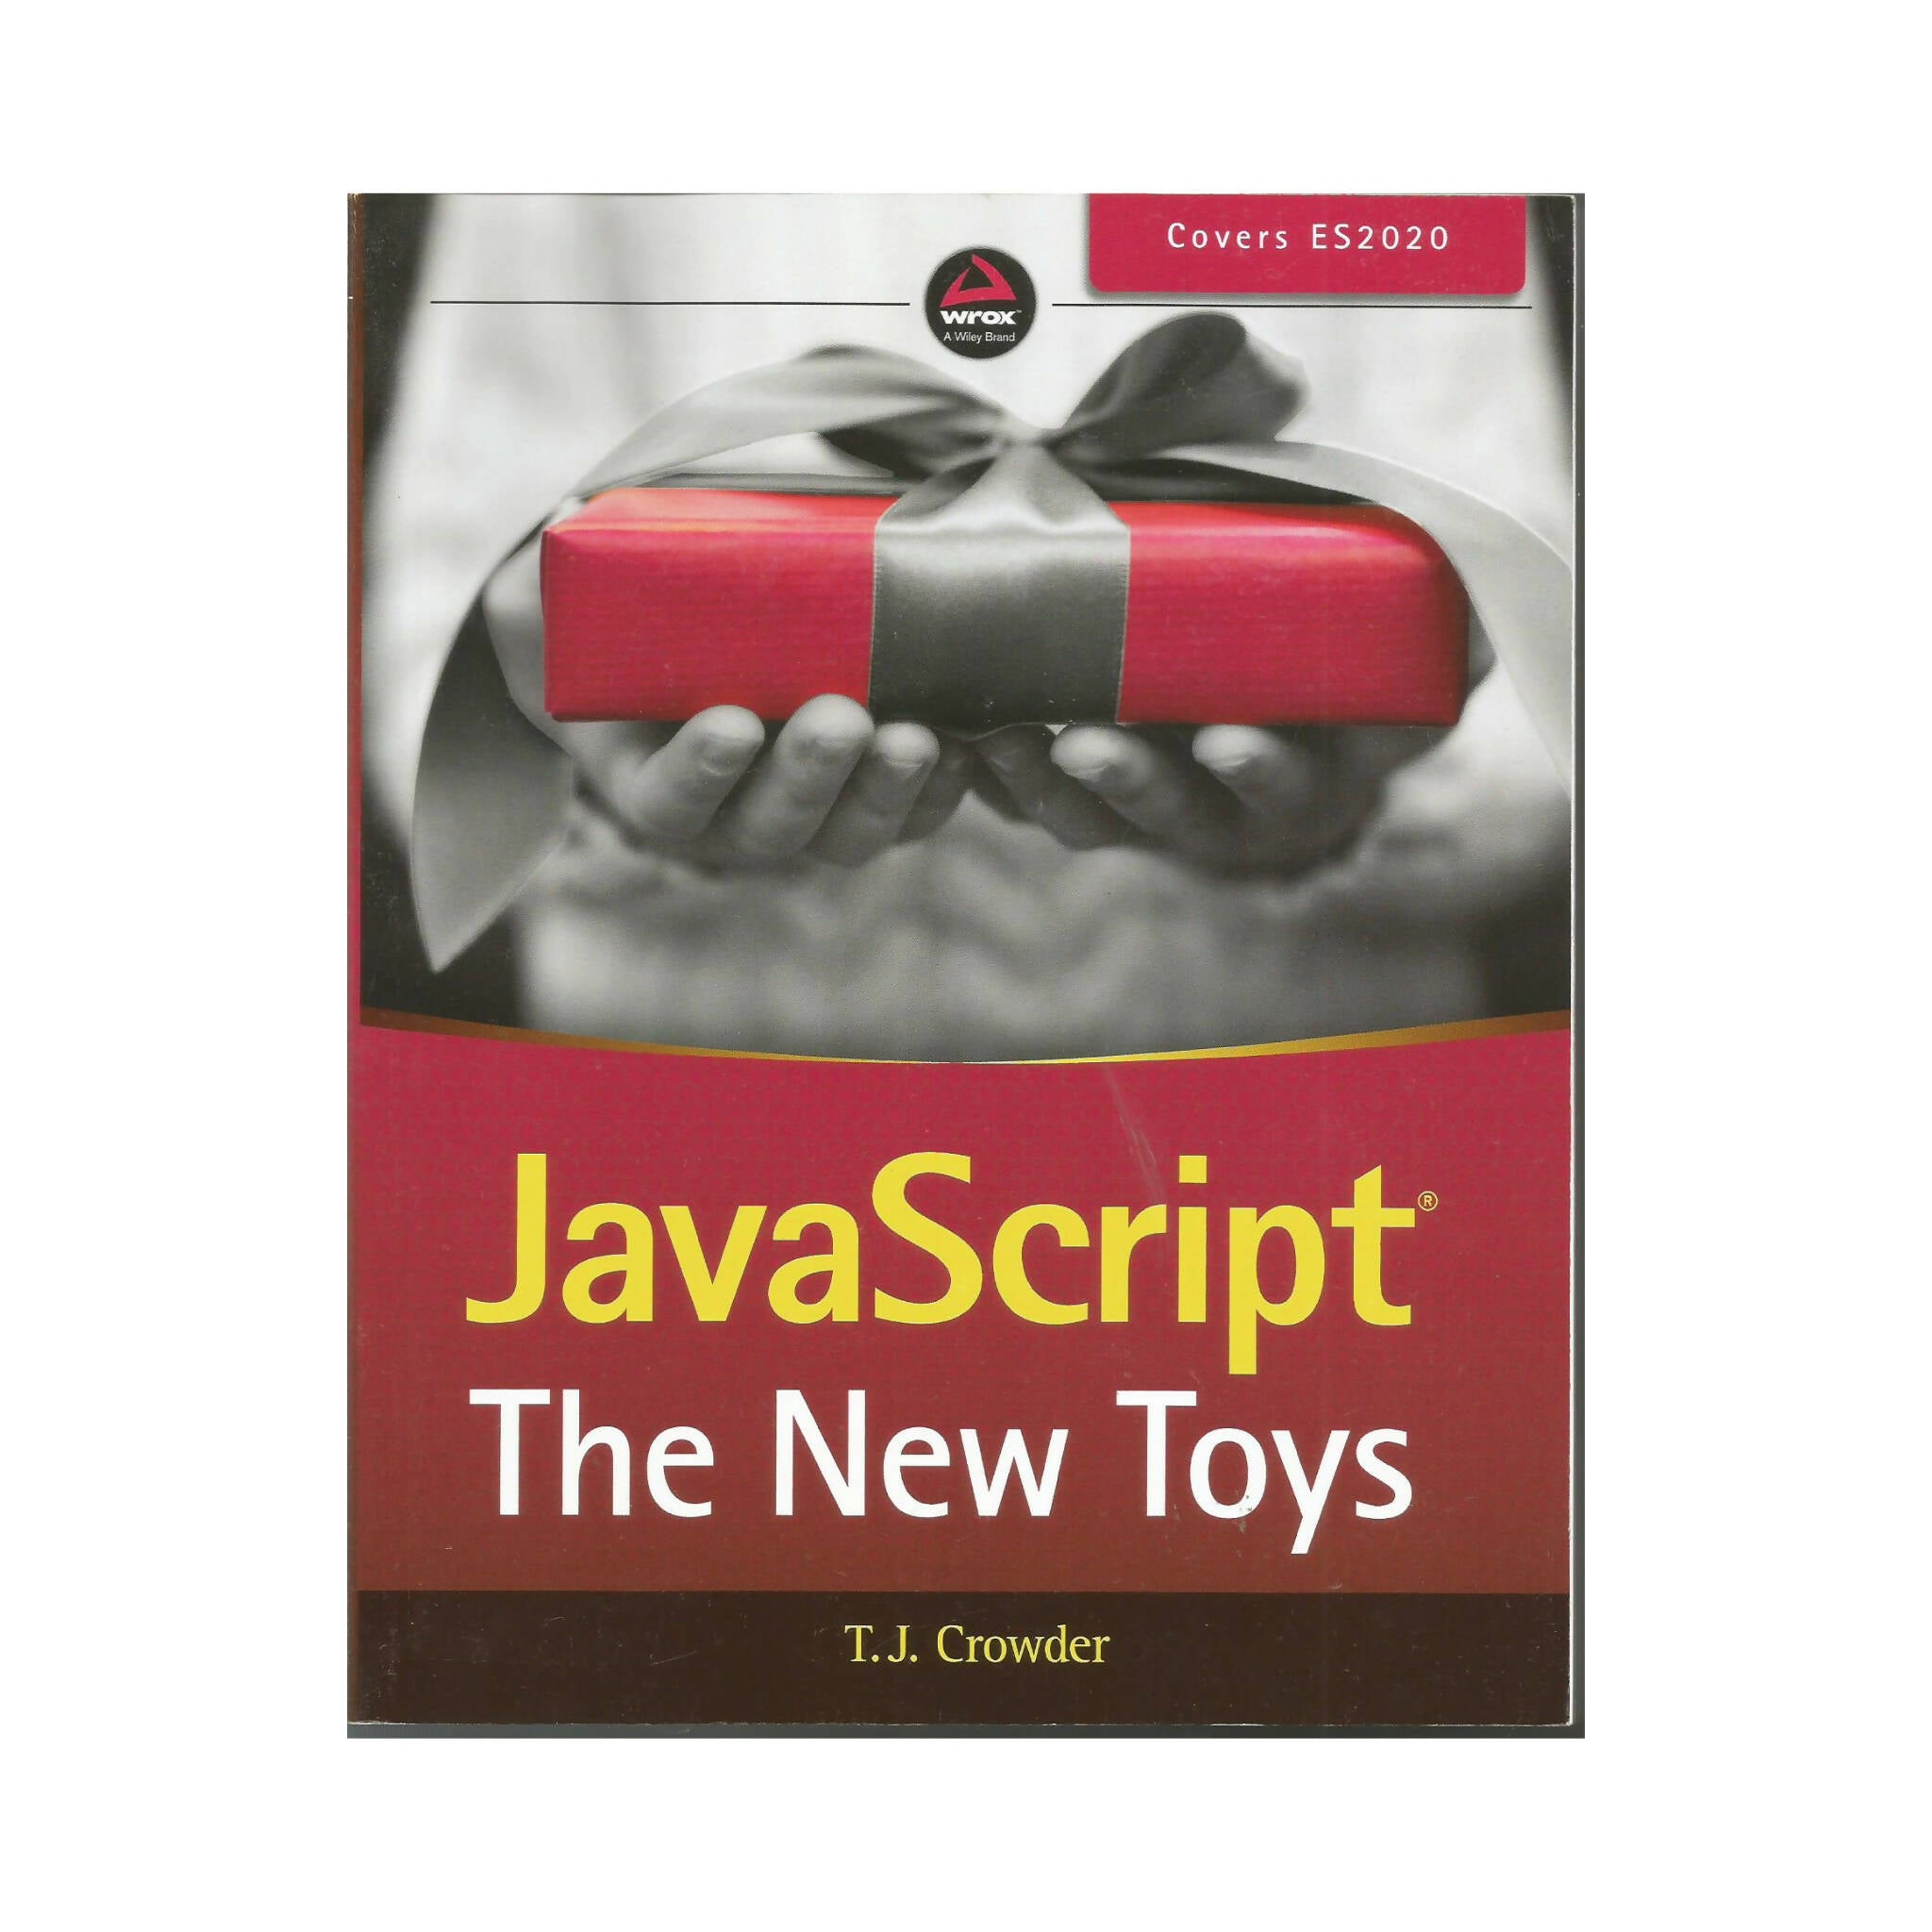 Book, JavaScript, The New Toys